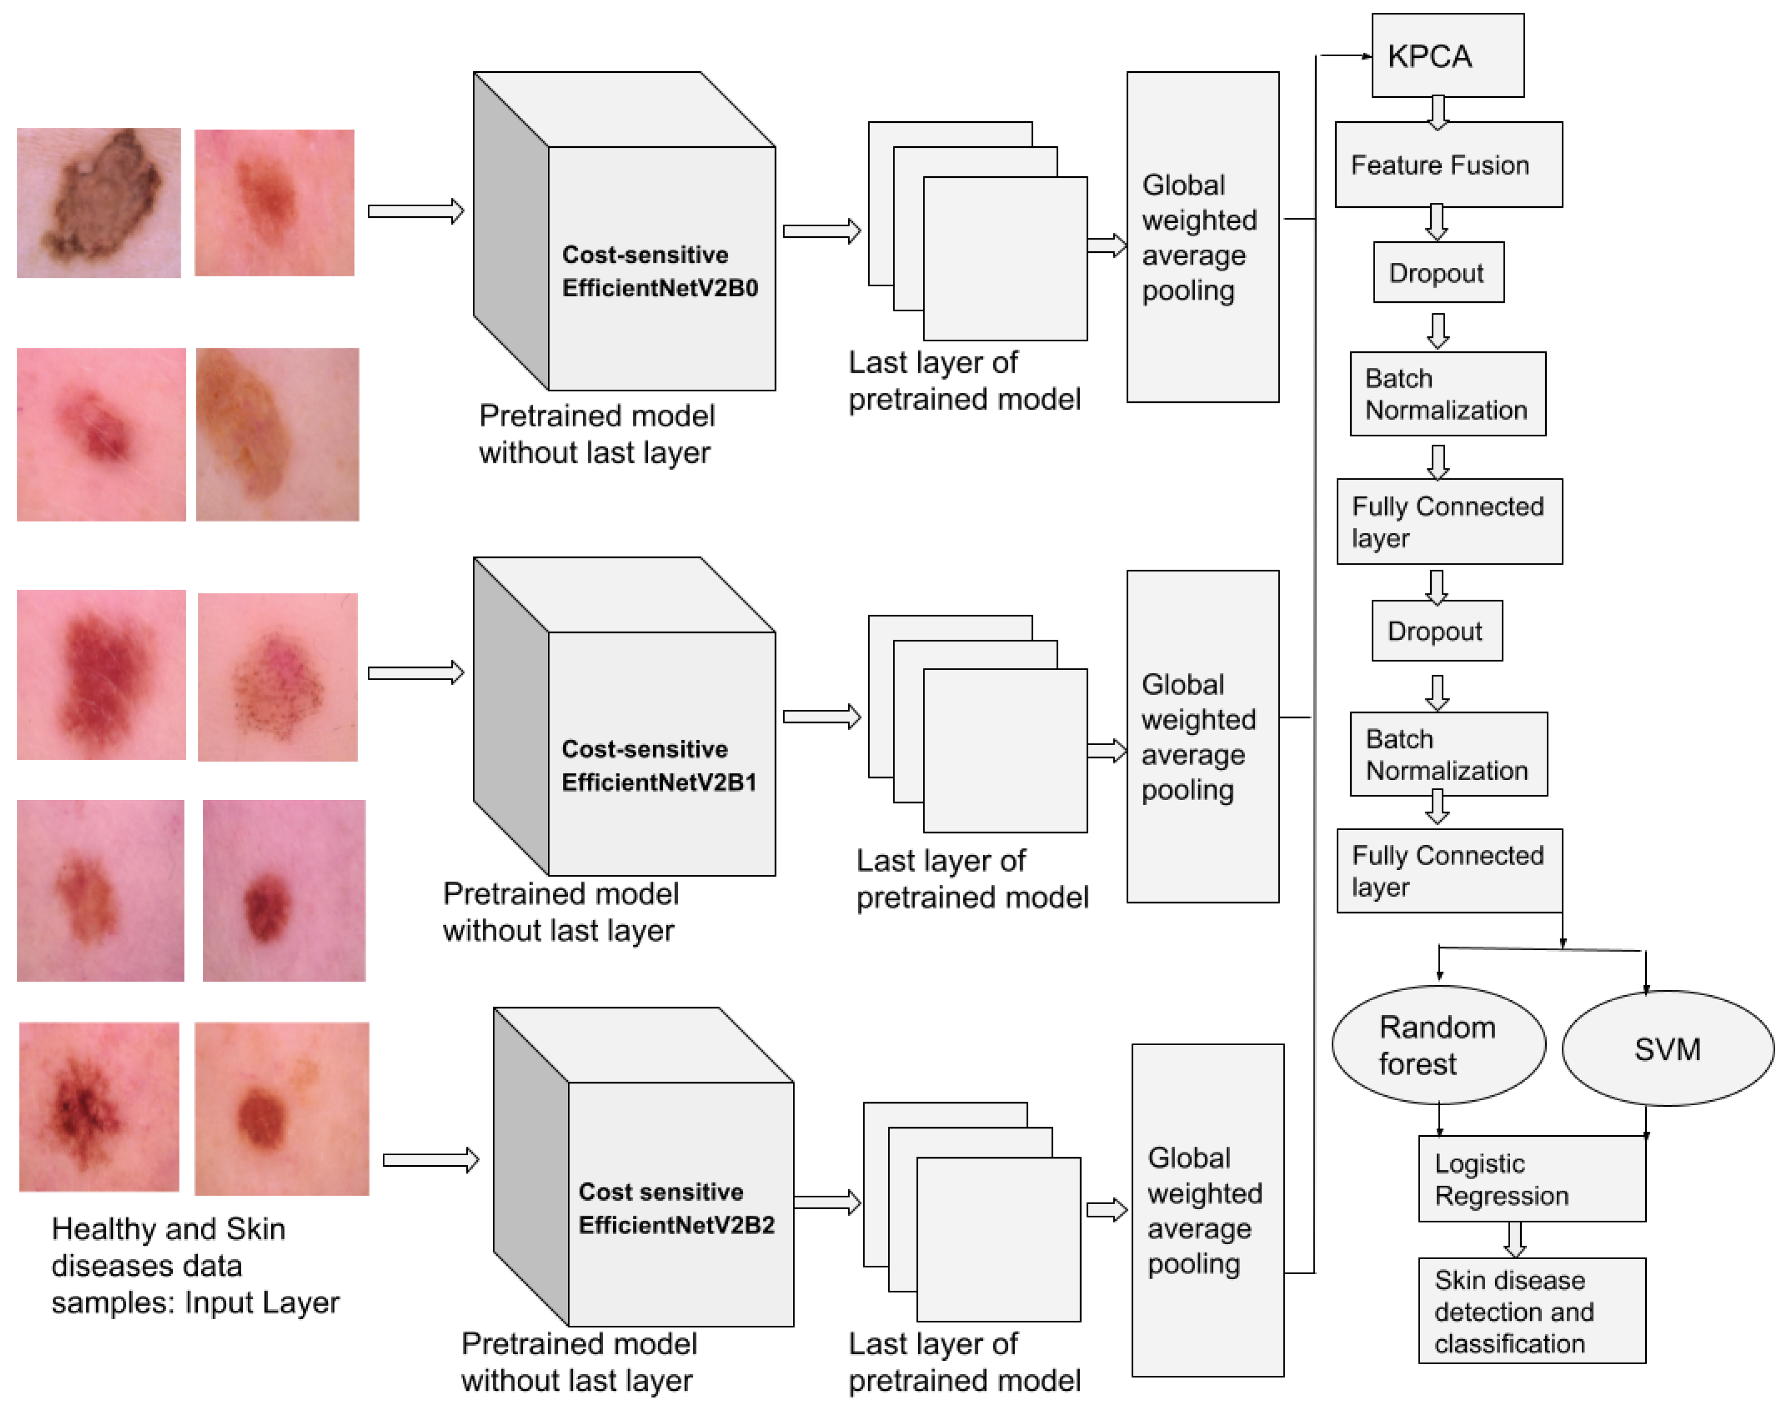 Pdf Classification Of Skin Cancer Images Using Tensor - vrogue.co